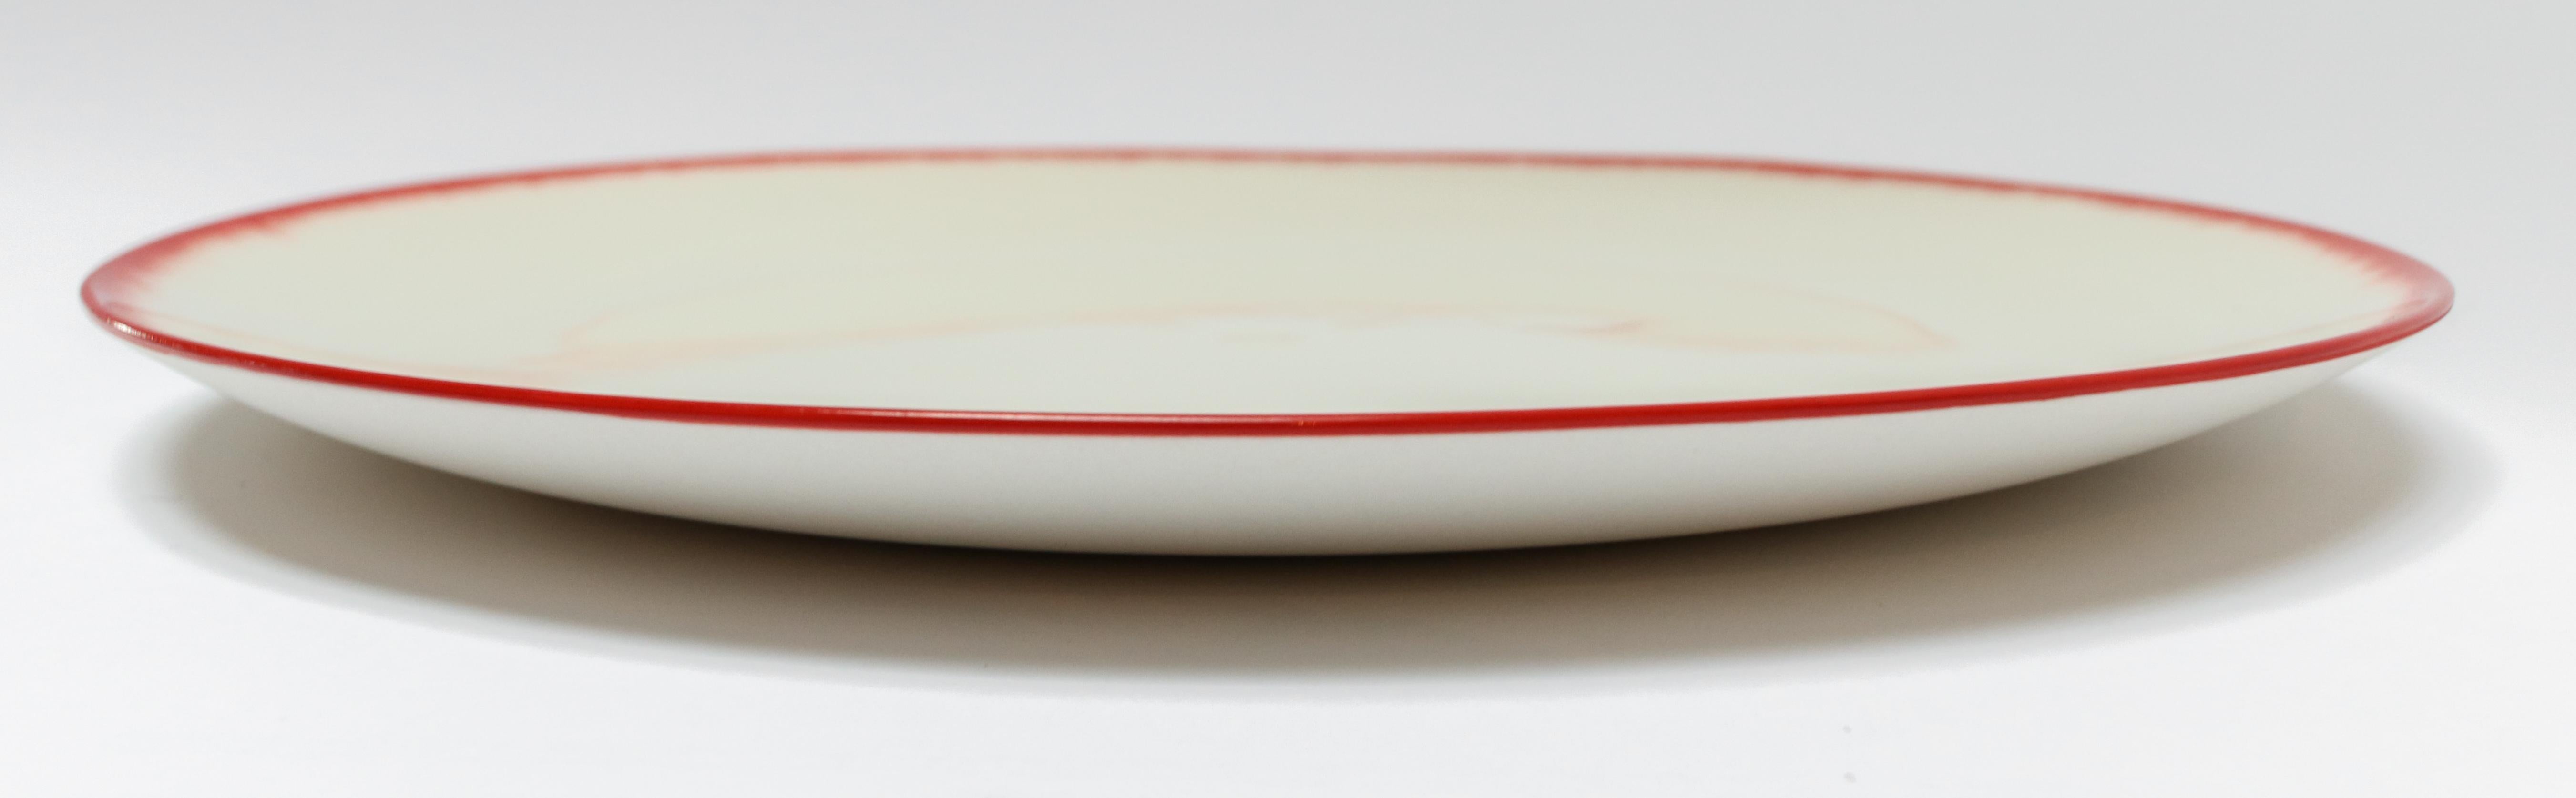 Belgian Ann Demeulemeester for Serax Dé Dinner Plate / Charger in off White / Red Rim For Sale